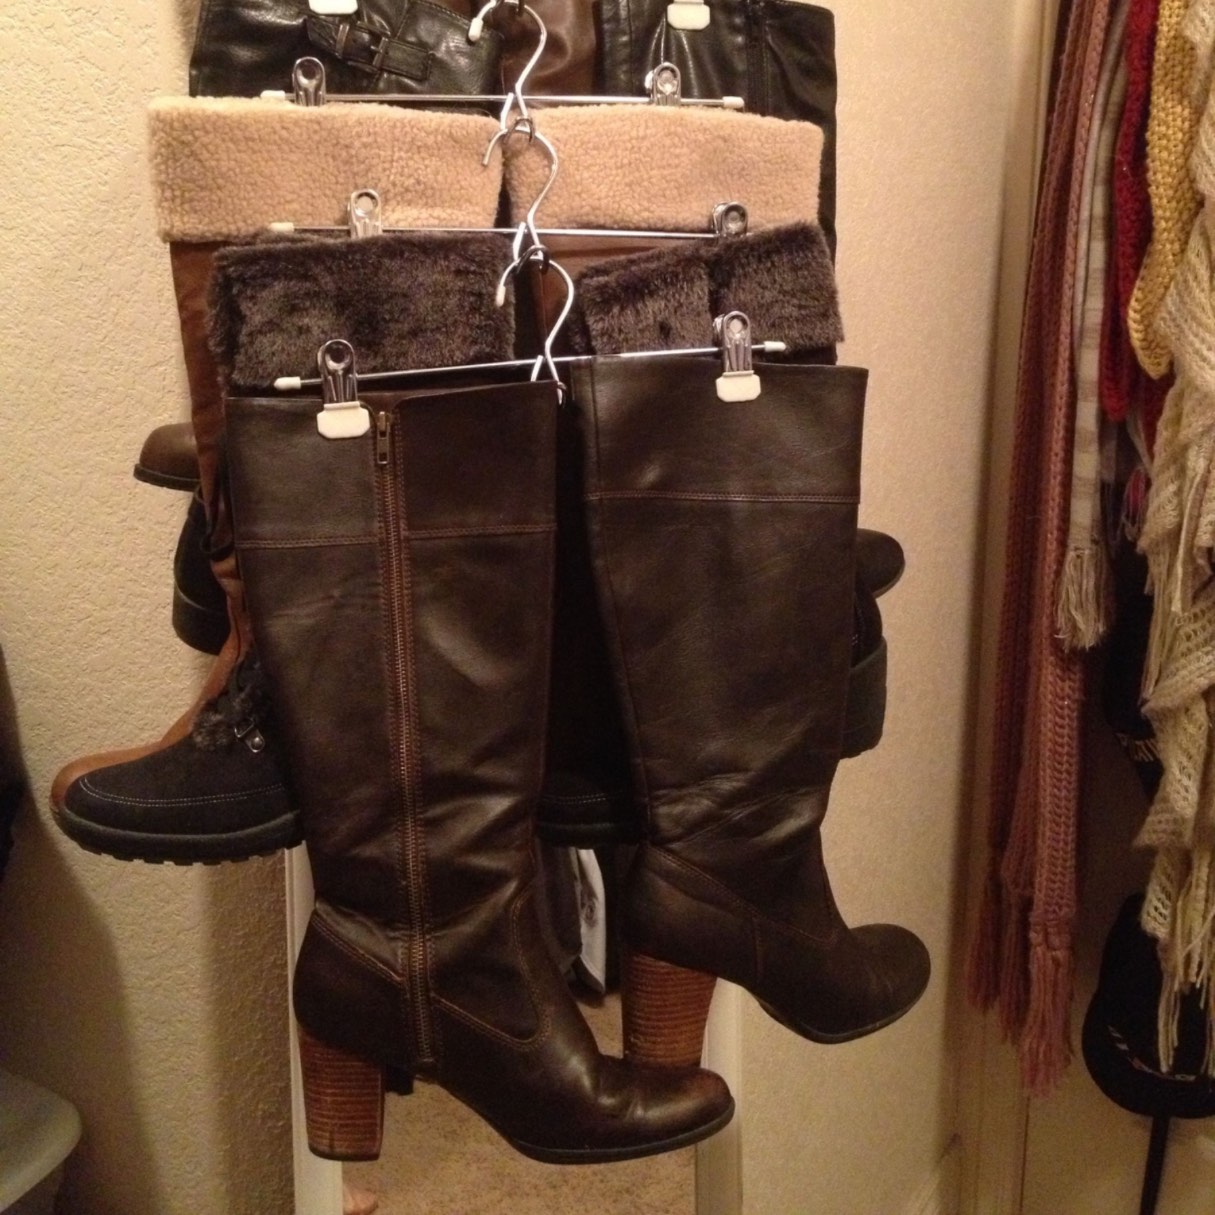 How To Store Long Boots | Storables